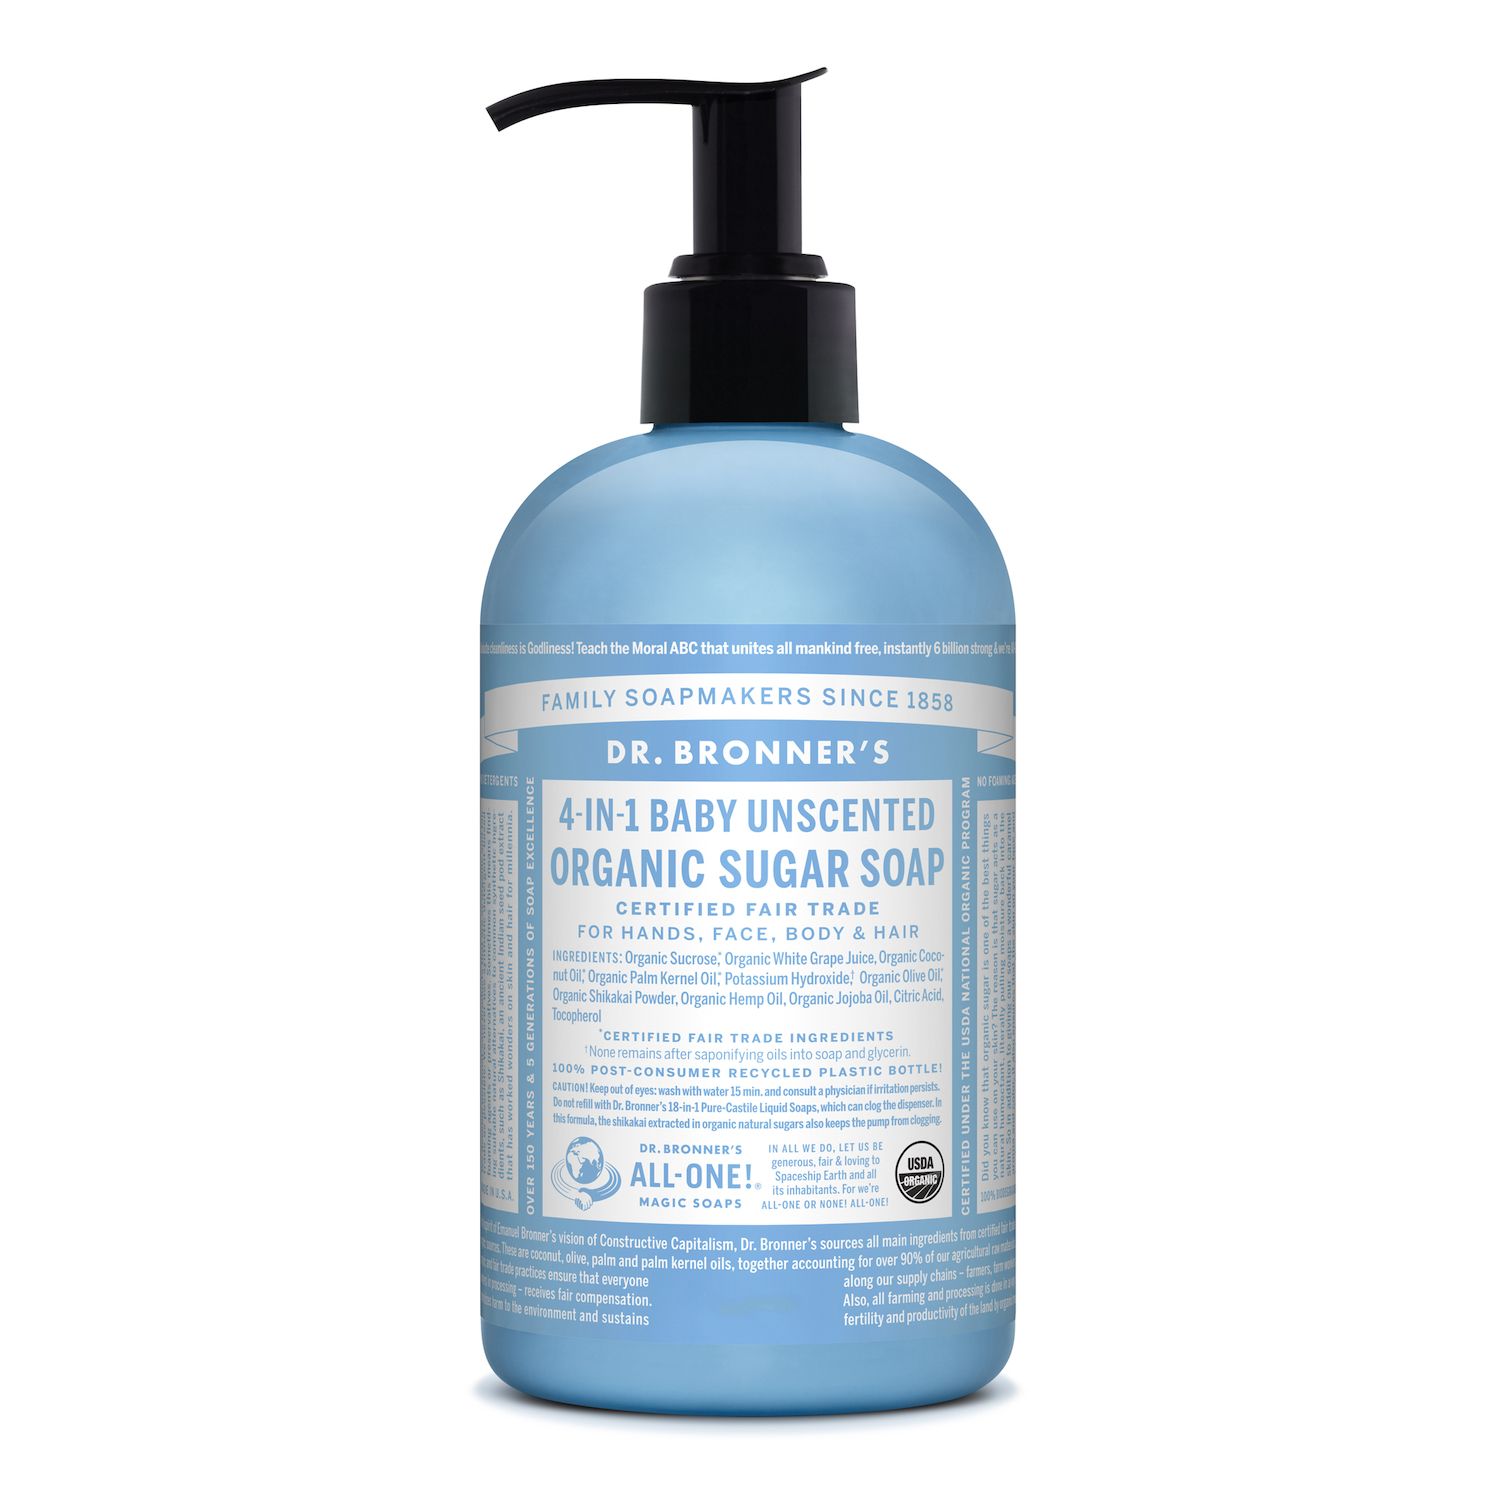 Image for Dr. Bronner’s Organic Baby Pump Soap - Unscented at Kohl's.